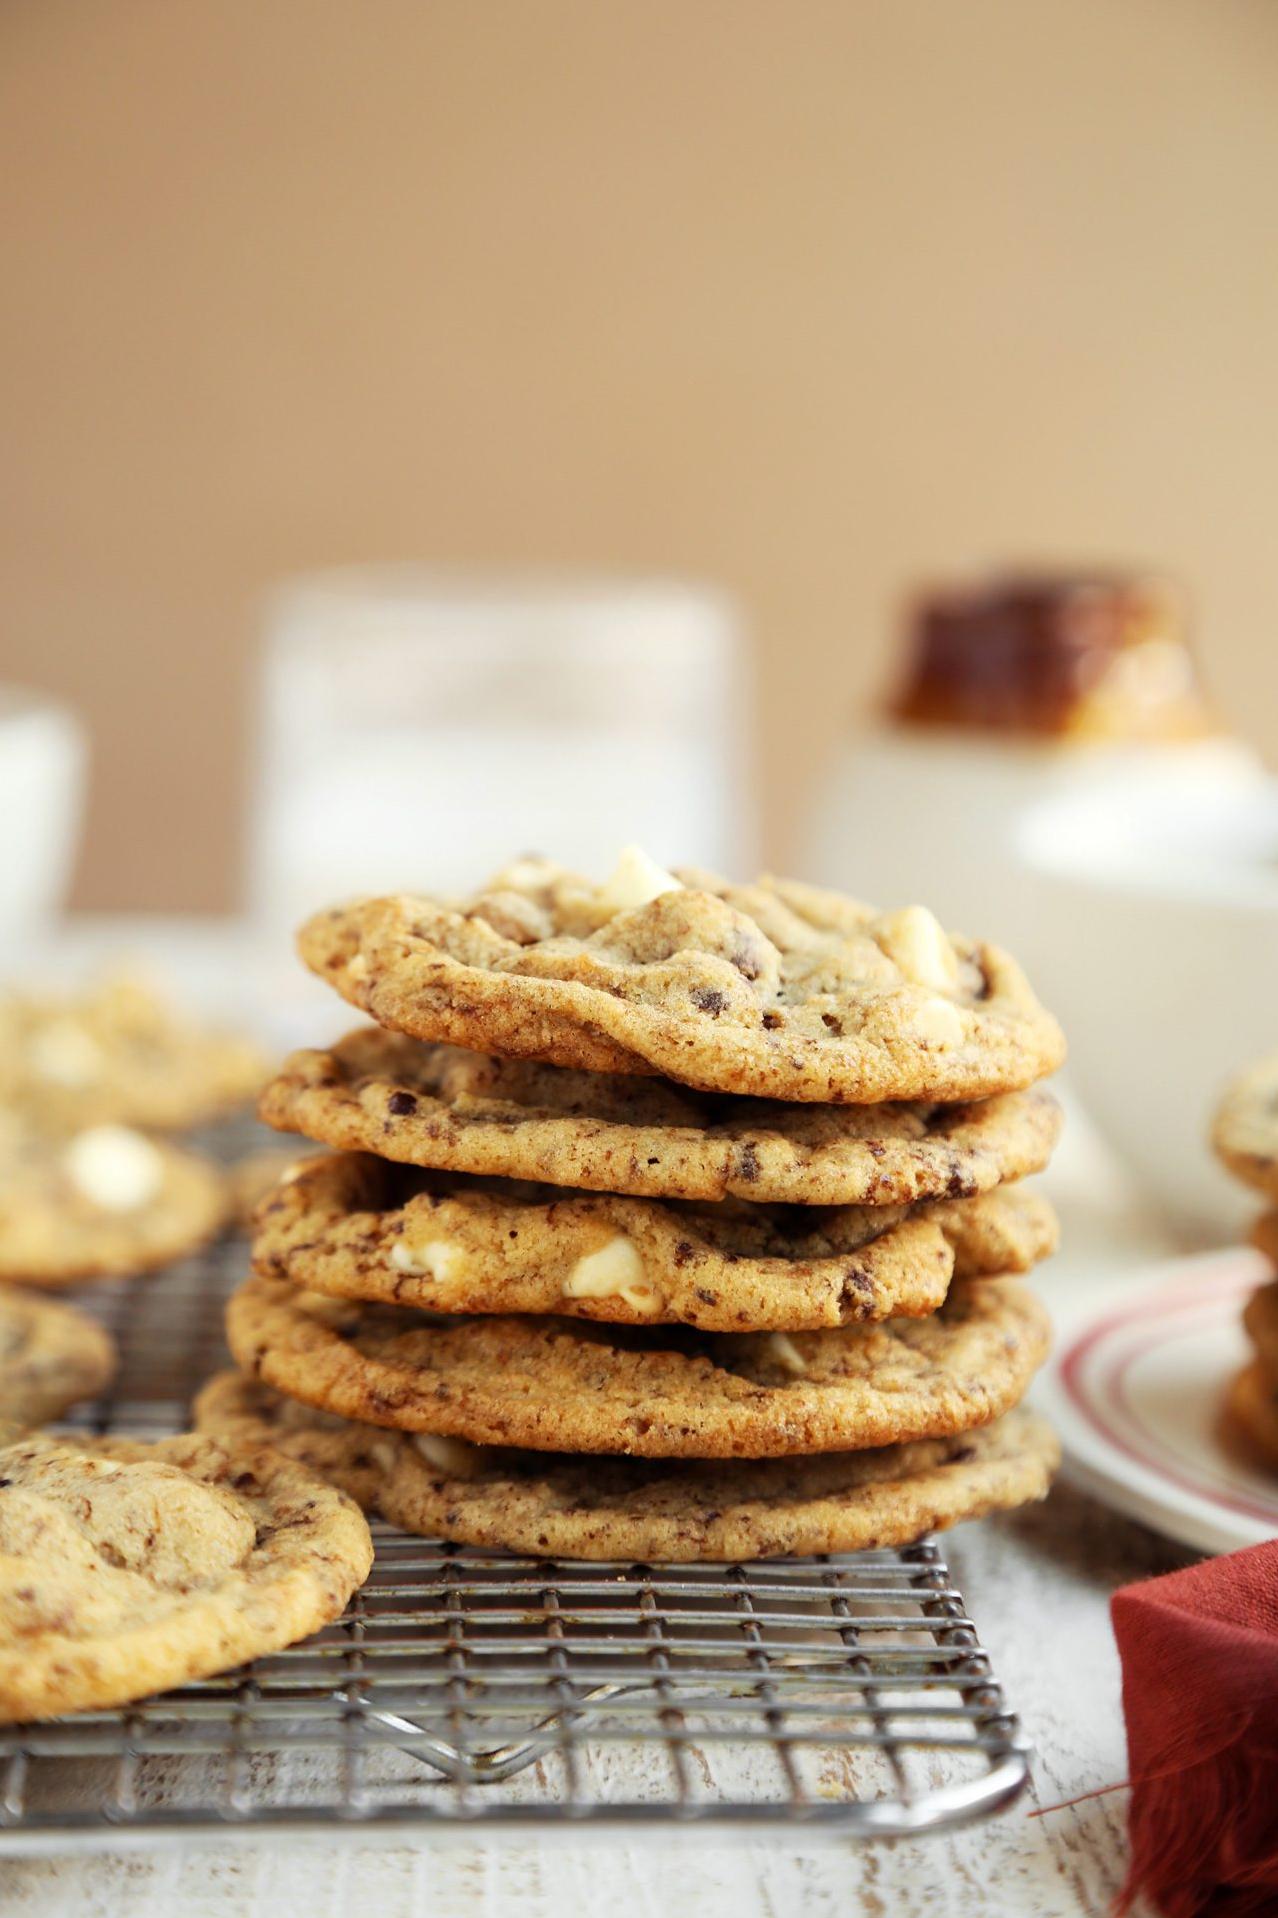  You can make these cookies in batches and keep them stored in an airtight container for days of coffee-soaked bliss.